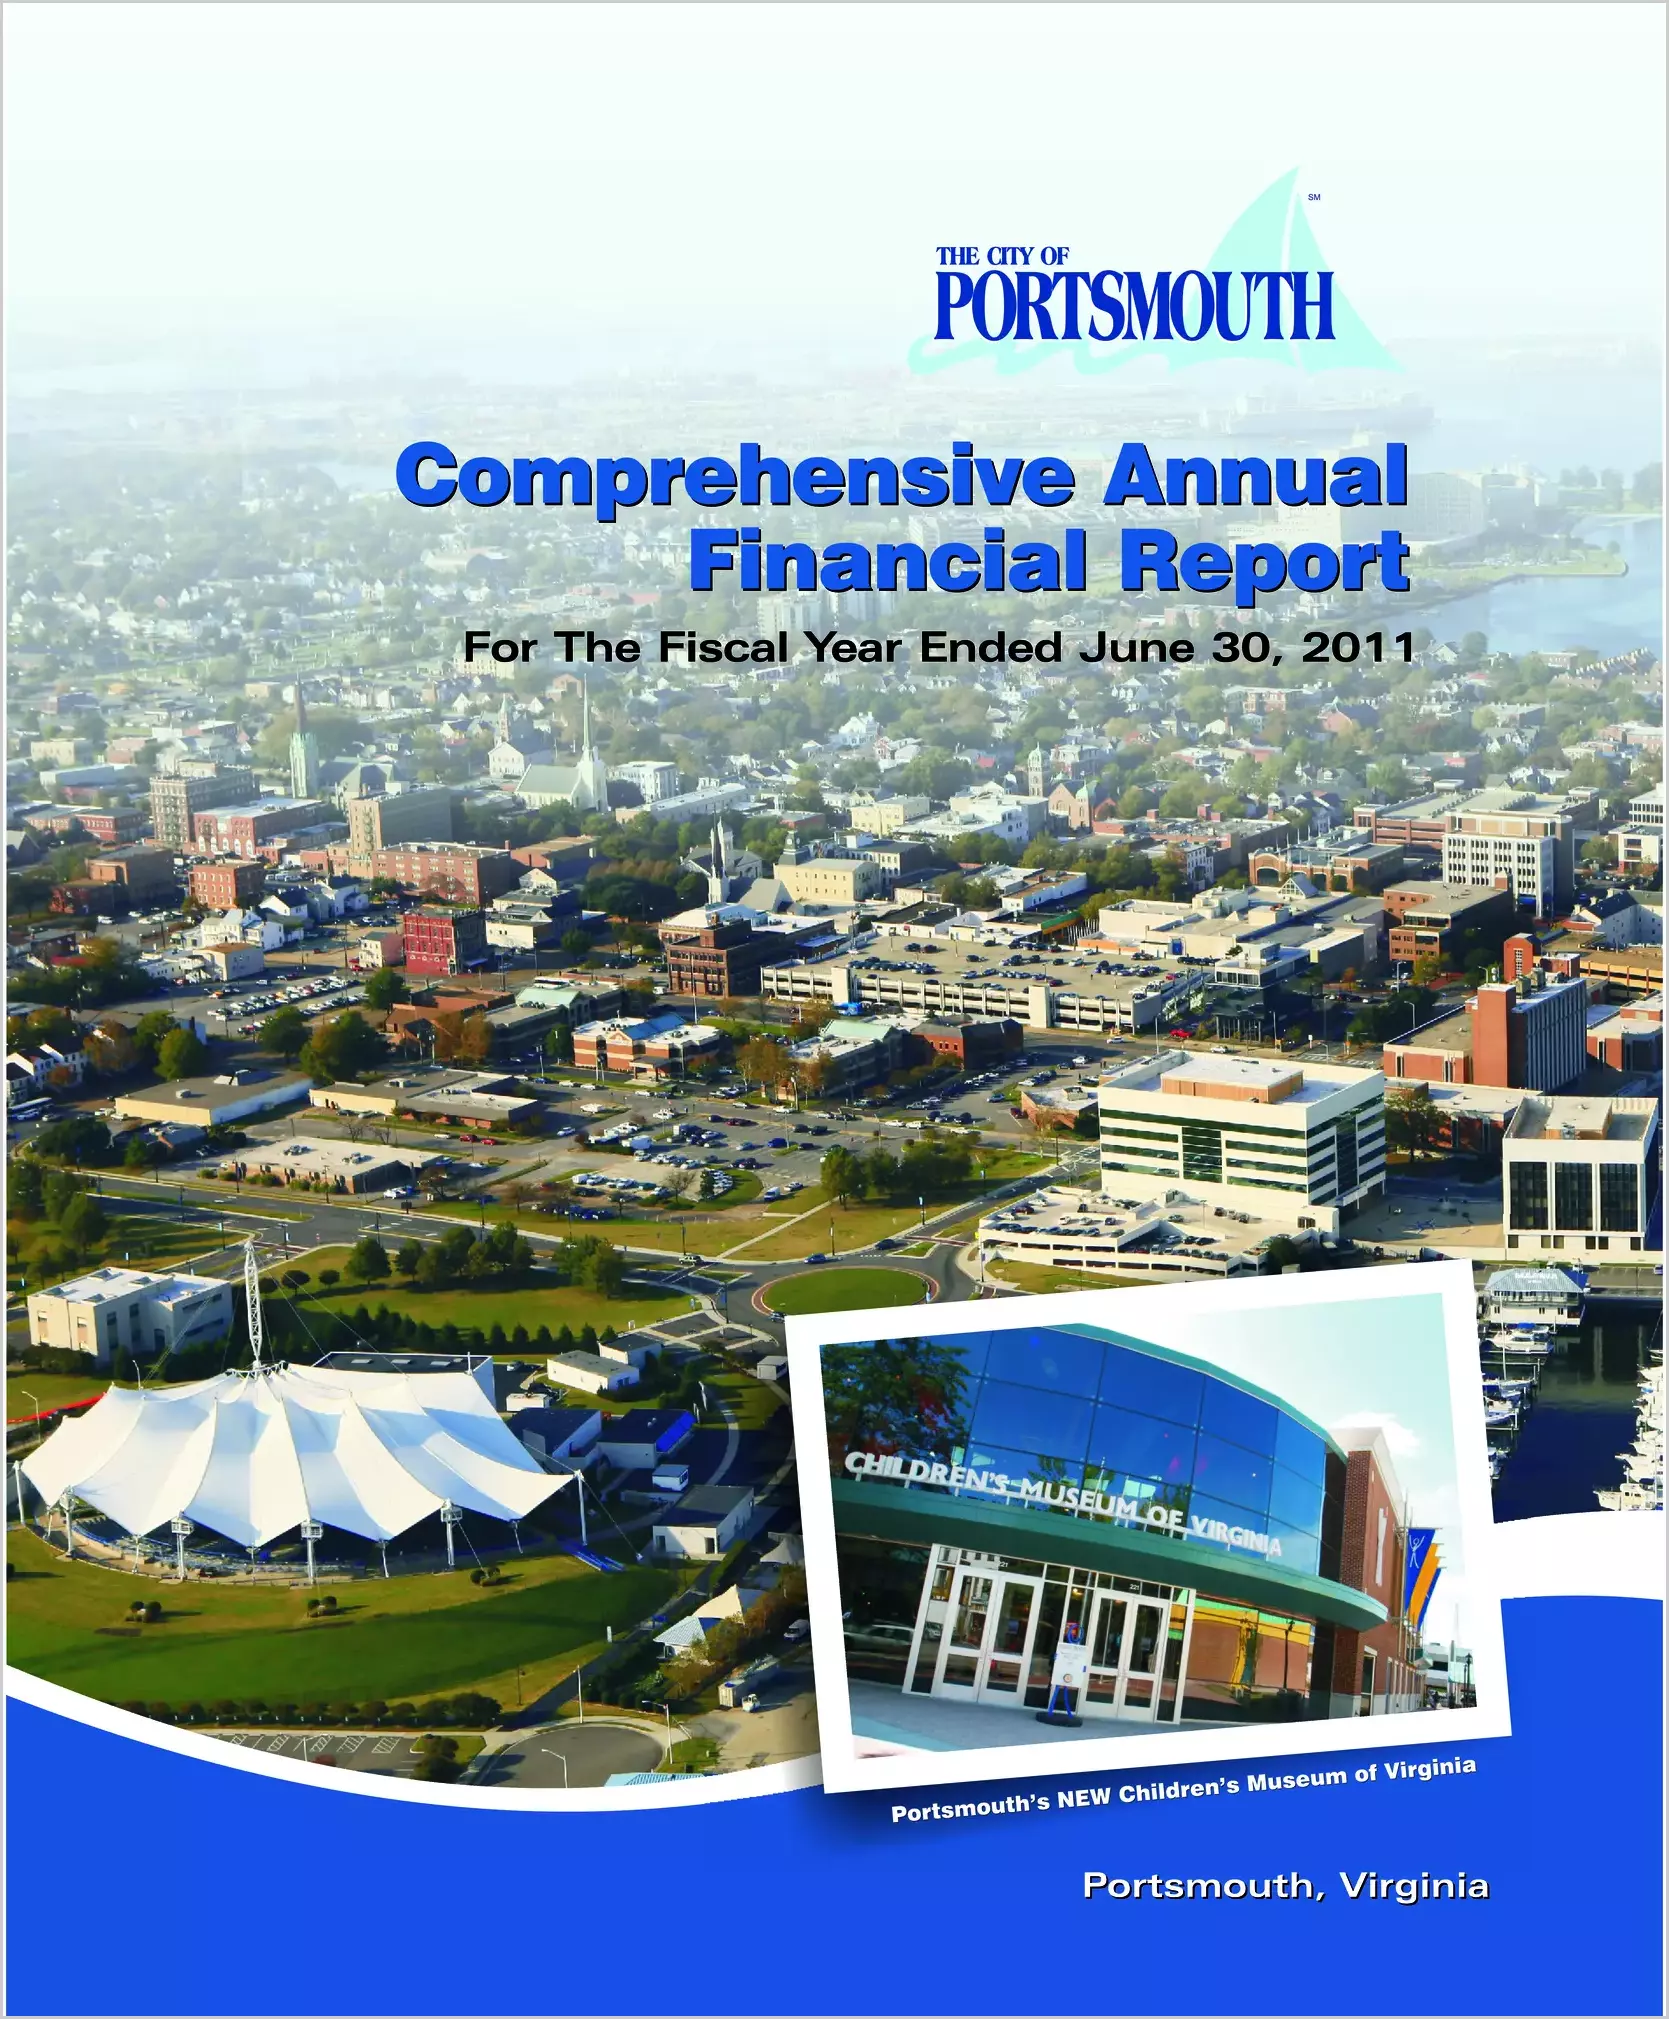 2011 Annual Financial Report for City of Portsmouth